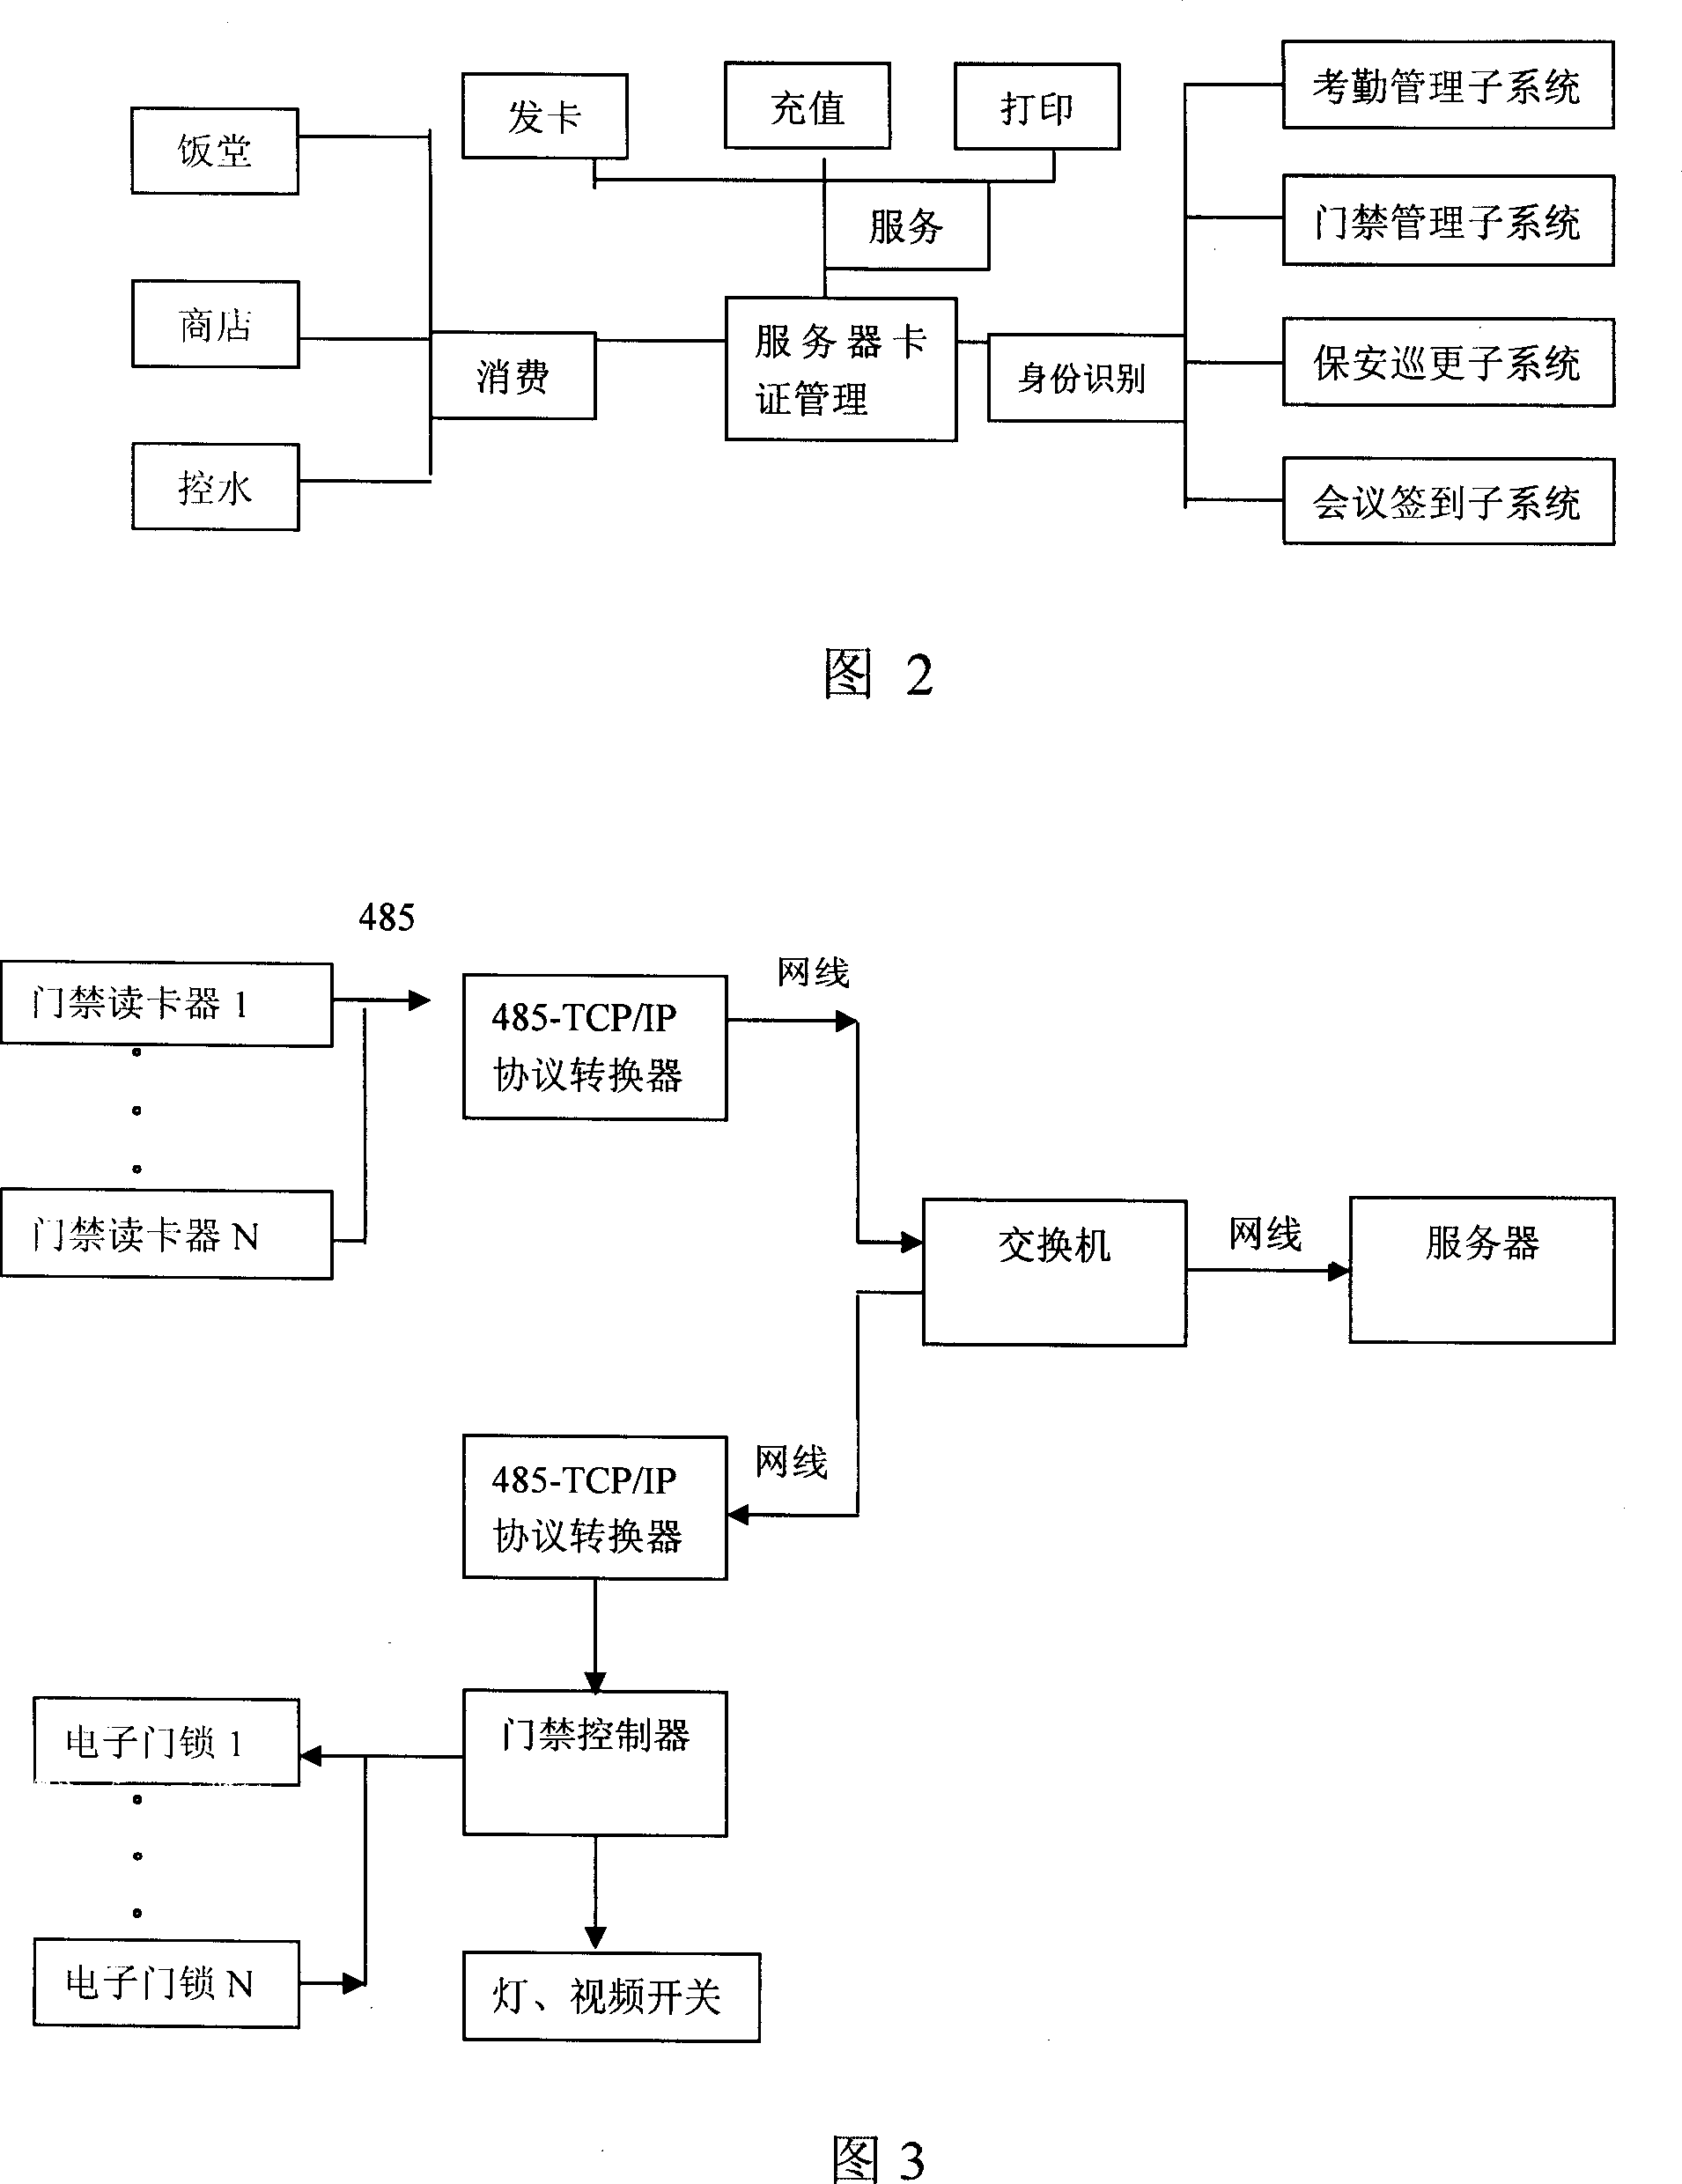 A multi-function intelligent card network management system and method